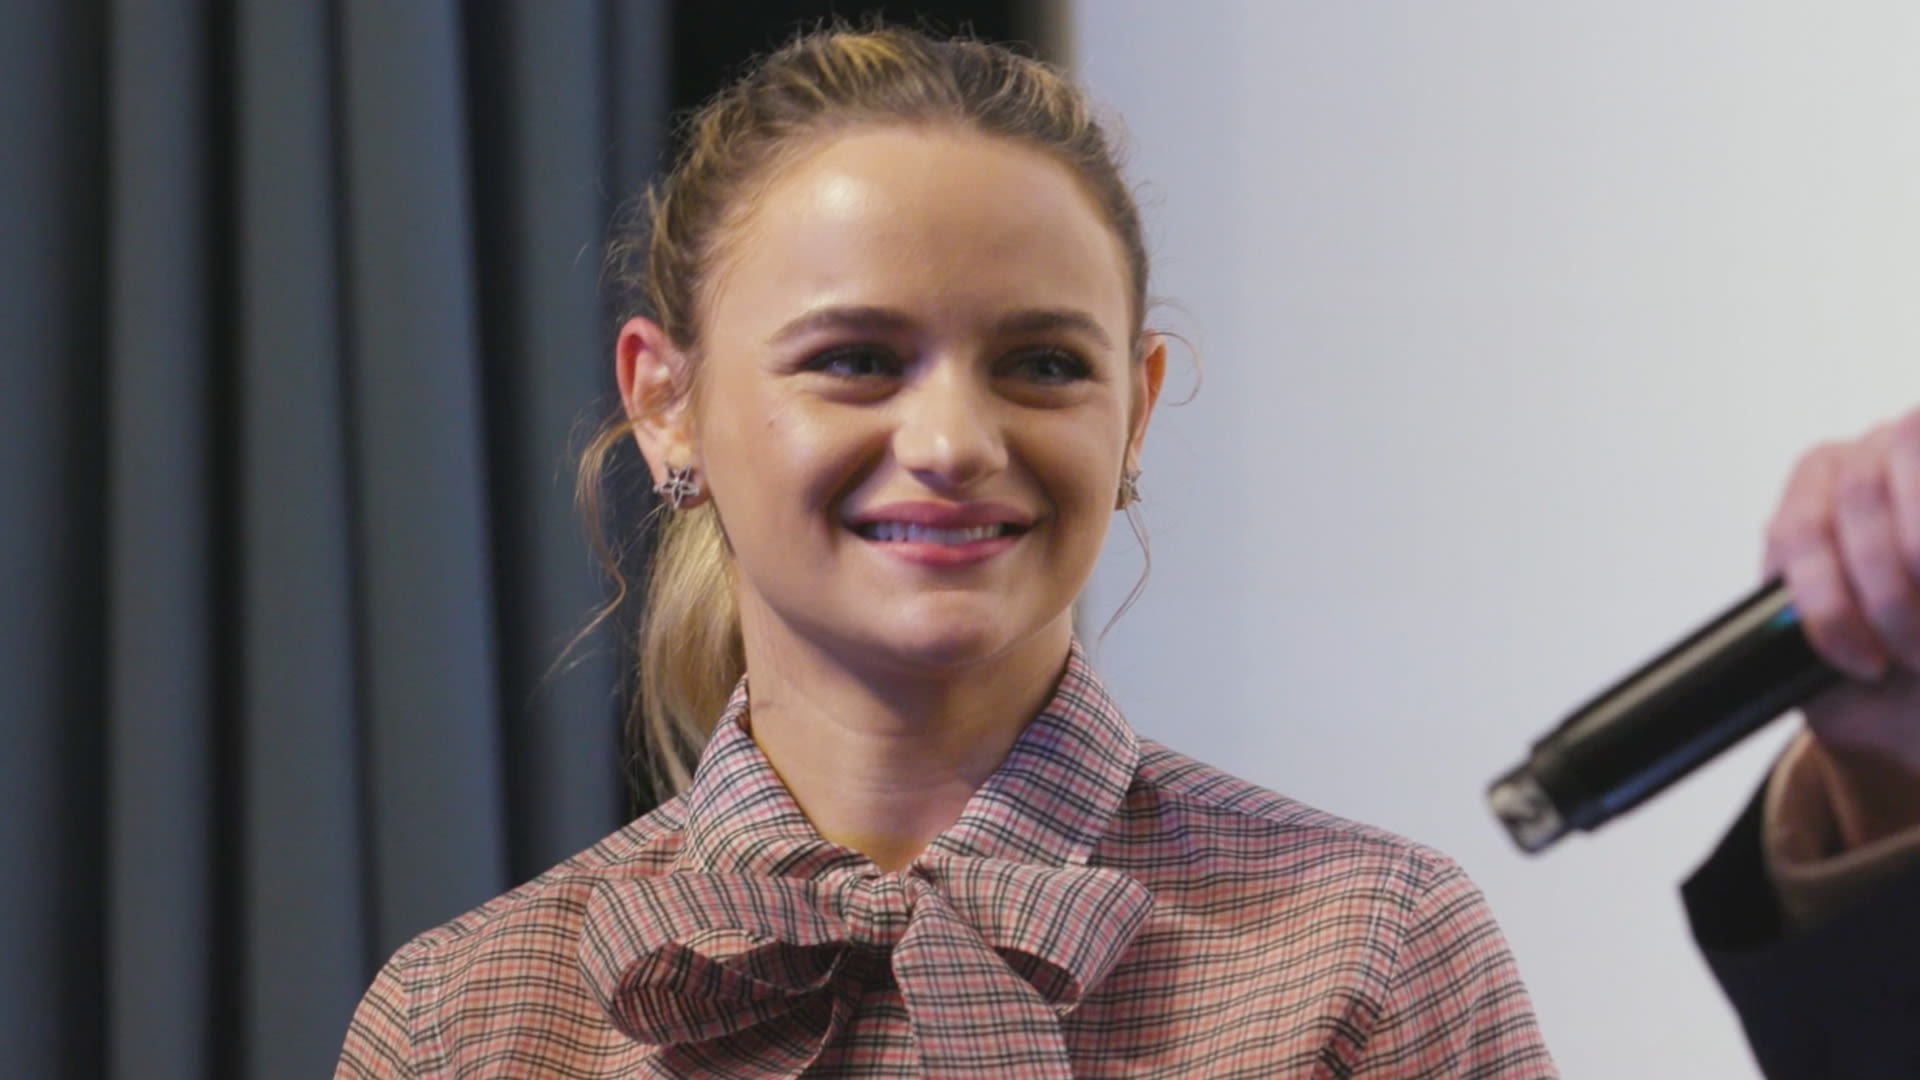 ... a Personal, Ferocious Tie to This”: ‘THR Frontrunners’ Q&A With ‘We Were the Lucky Ones’ Star Joey King